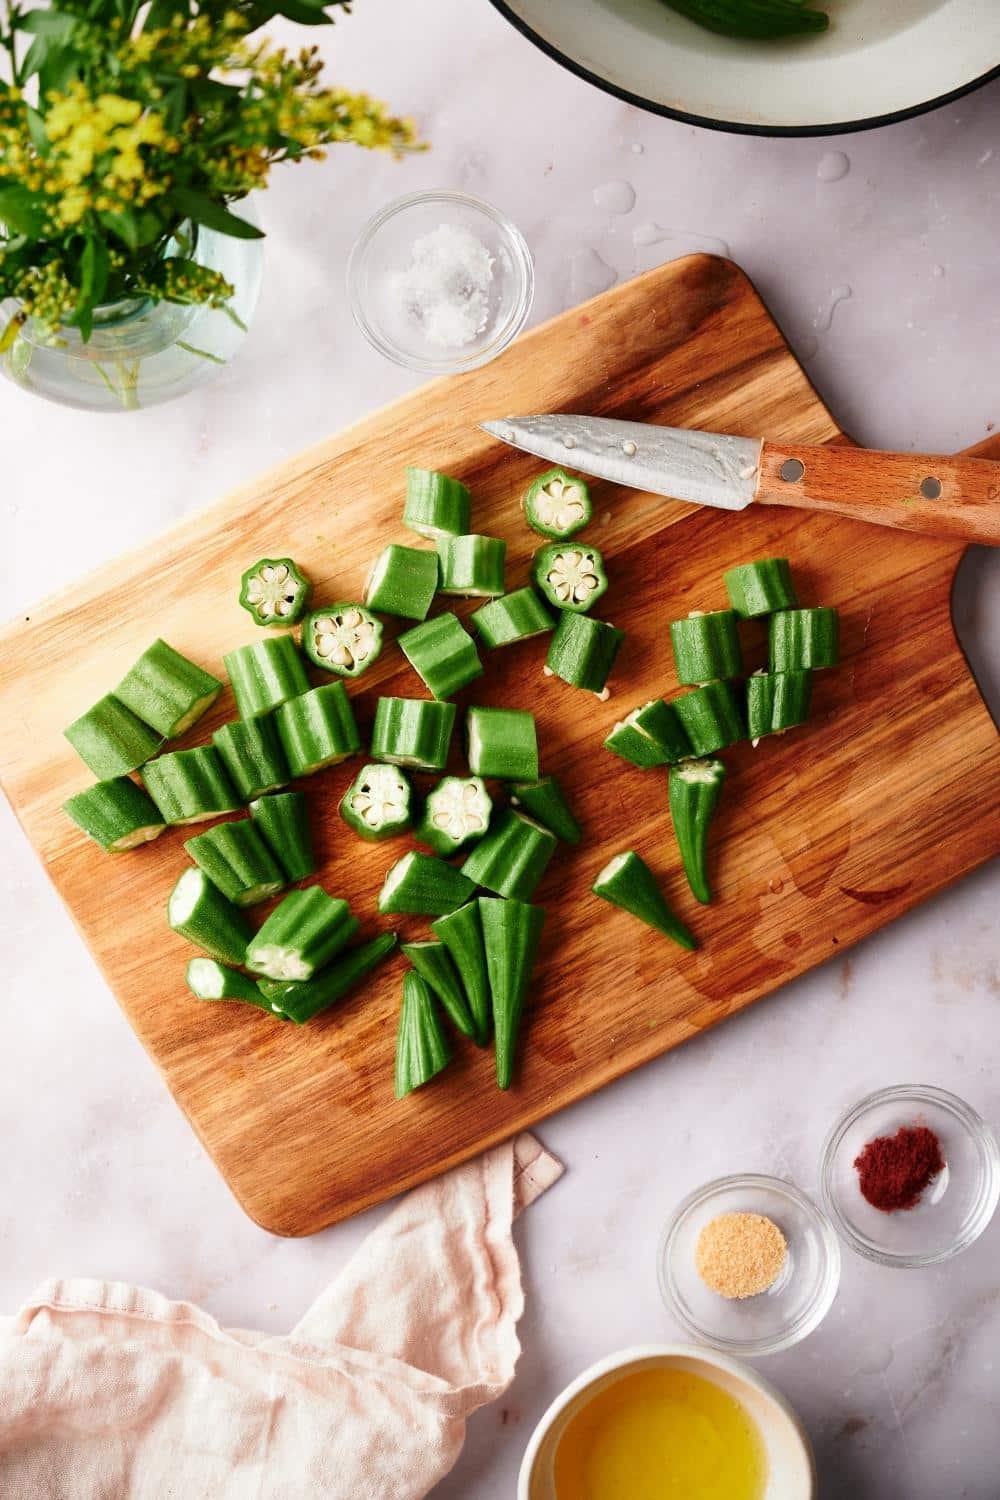 freshly chopped okra pieces on a cutting board on a marble countertop. a small knife with a wooden handle is on the side. Small bowls of garlic powder, salt, paprika, and melted butter surround the board as well as a small tea towel.